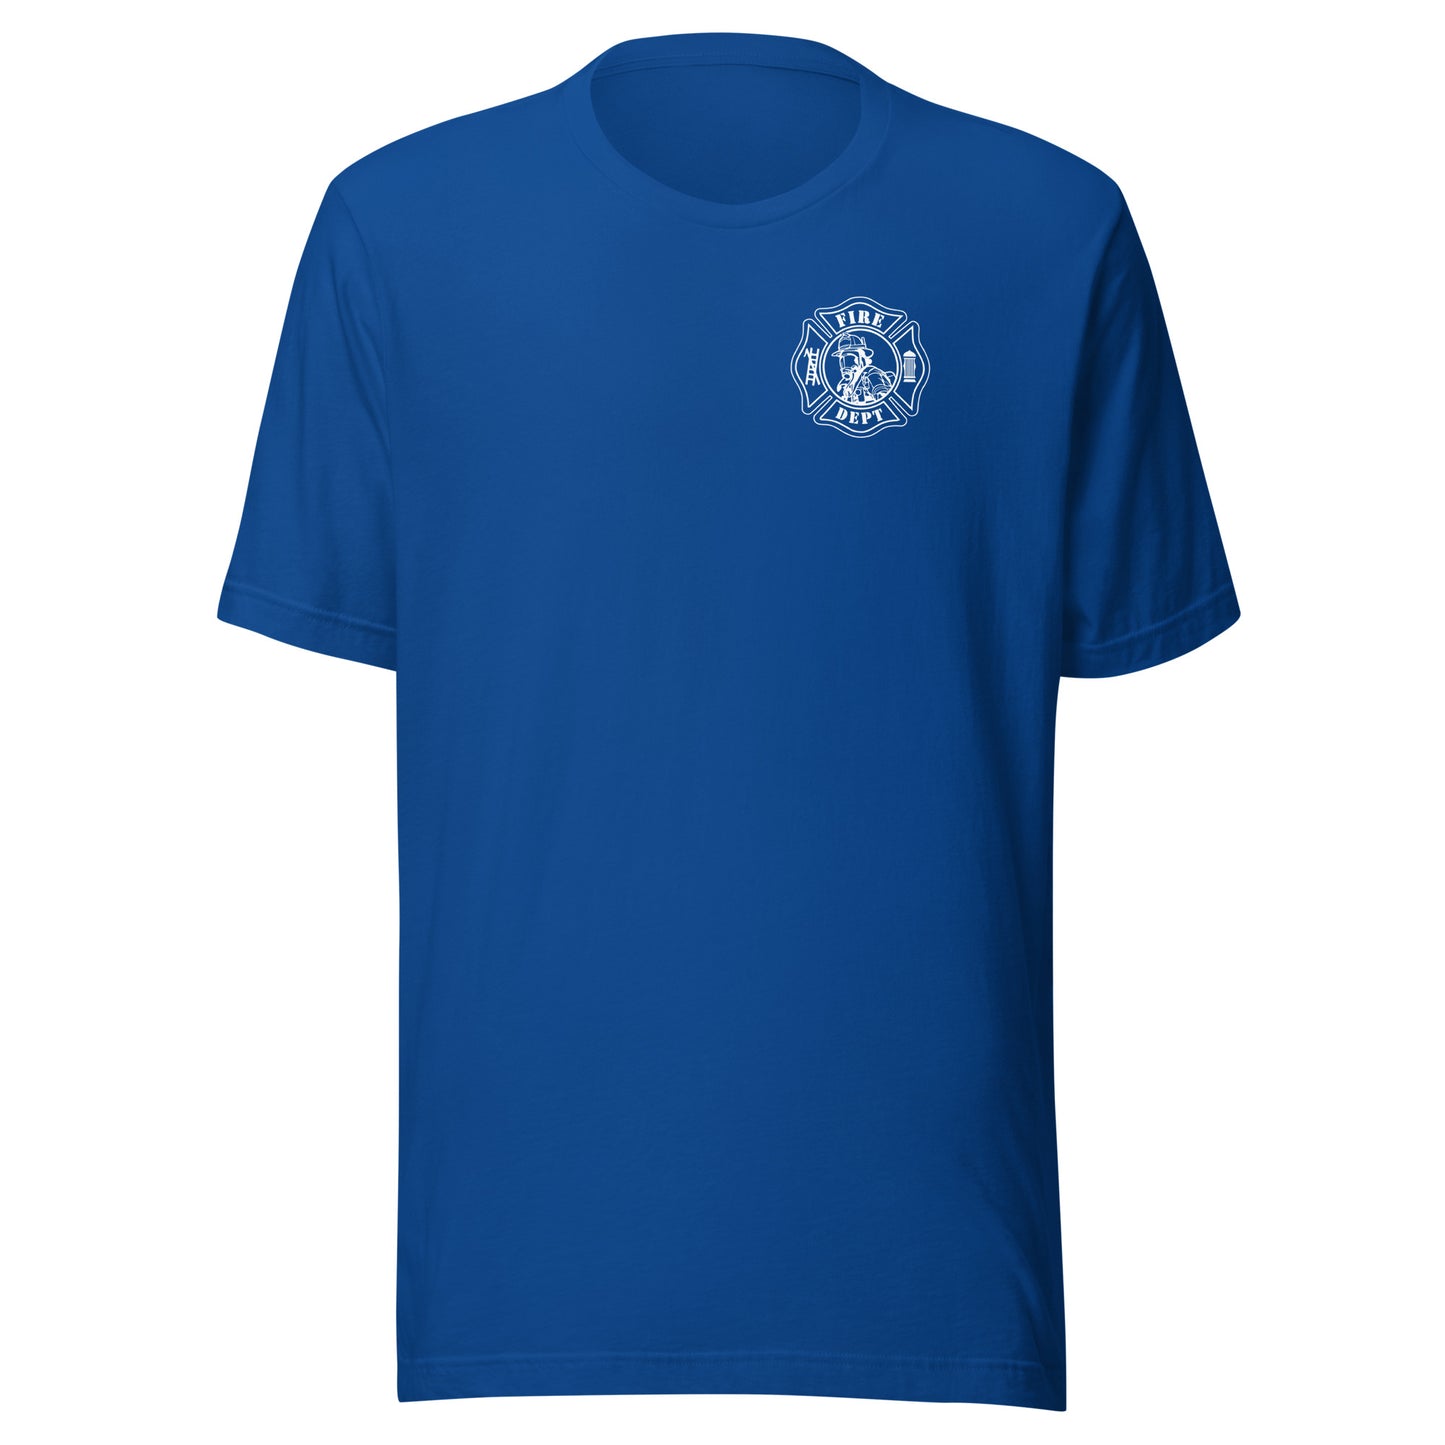 Fire Department Maltese Cross Front and Back Unisex Premium T-shirt